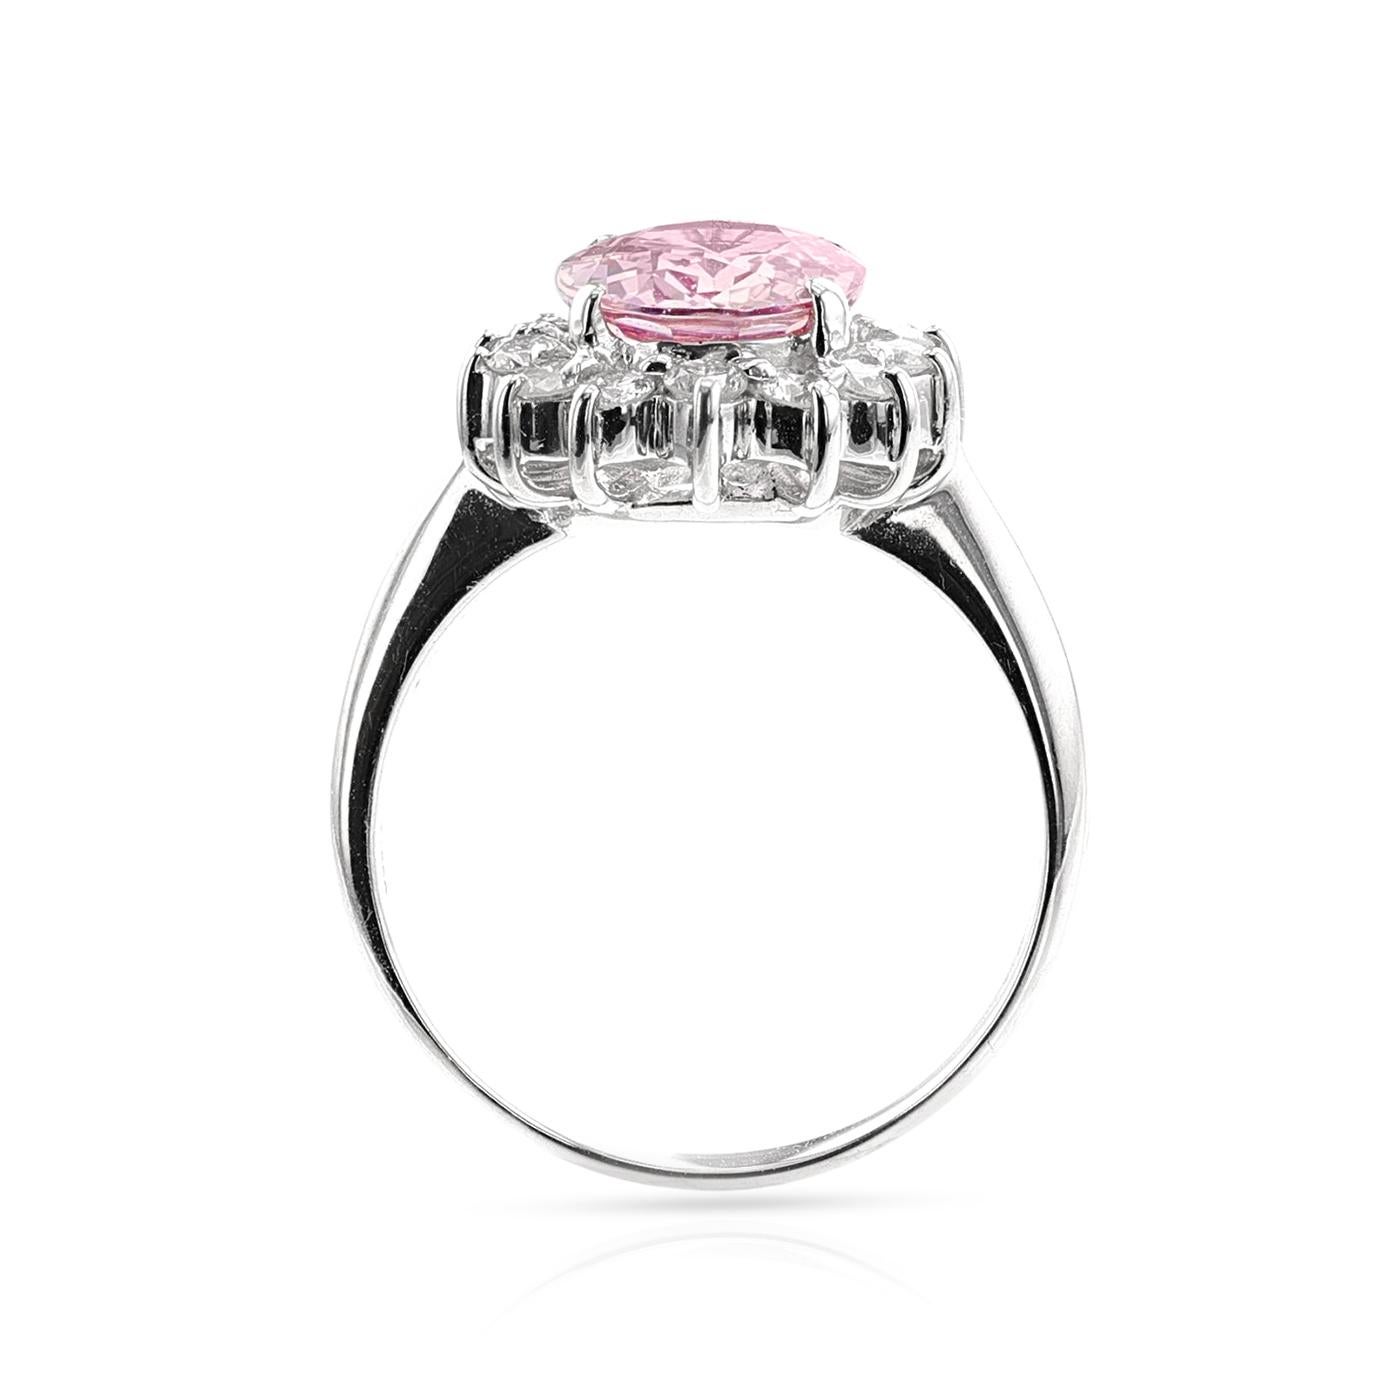 A beautiful and pleasant natural pink sapphire and diamond platinum ring, set with an oval-shaped mixed-cut unheated pink sapphire weighing 2.53-carats and surrounded by a cluster of round brilliant-cut diamonds weighing approximately 0.45-carats;